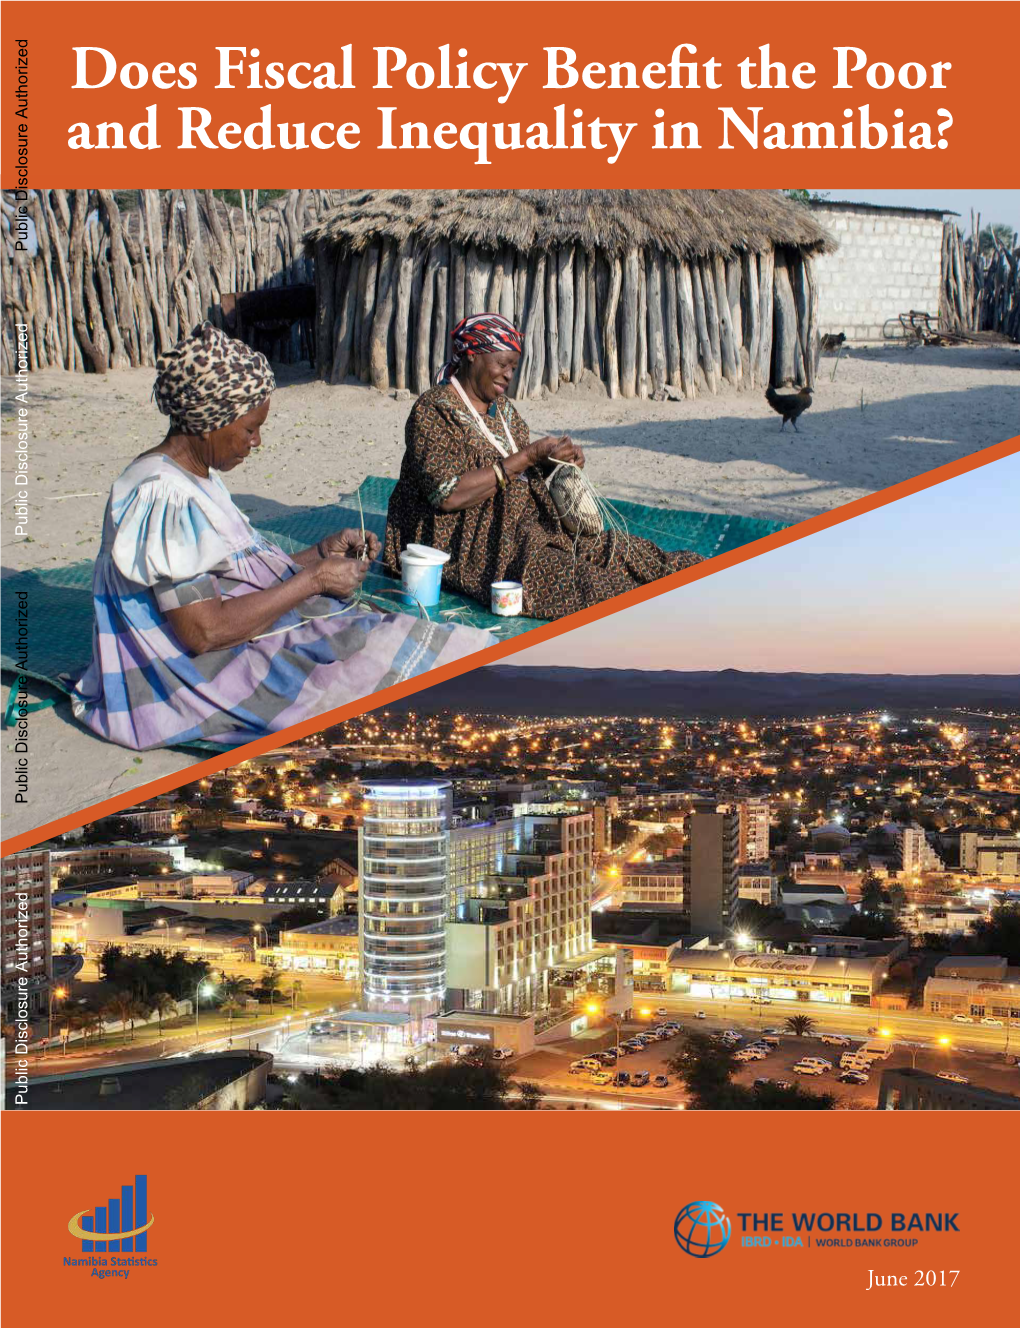 Does Fiscal Policy Benefit the Poor and Reduce Inequality in Namibia?